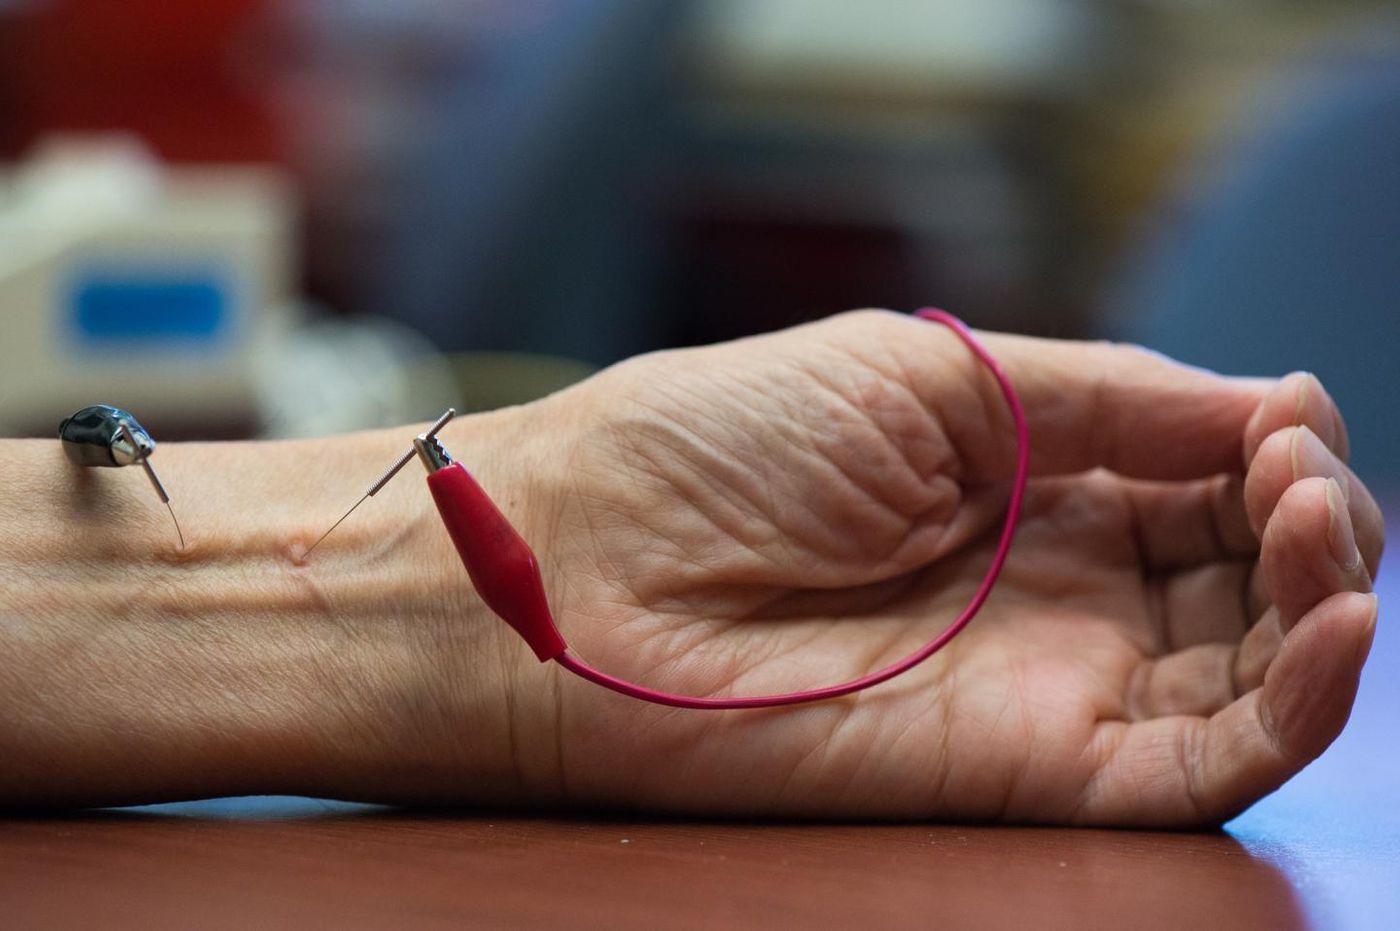 The study shows repetitive electroacupuncture evokes a long-lasting action in lowering blood pressure. Credit: Chris Nugent / UCI